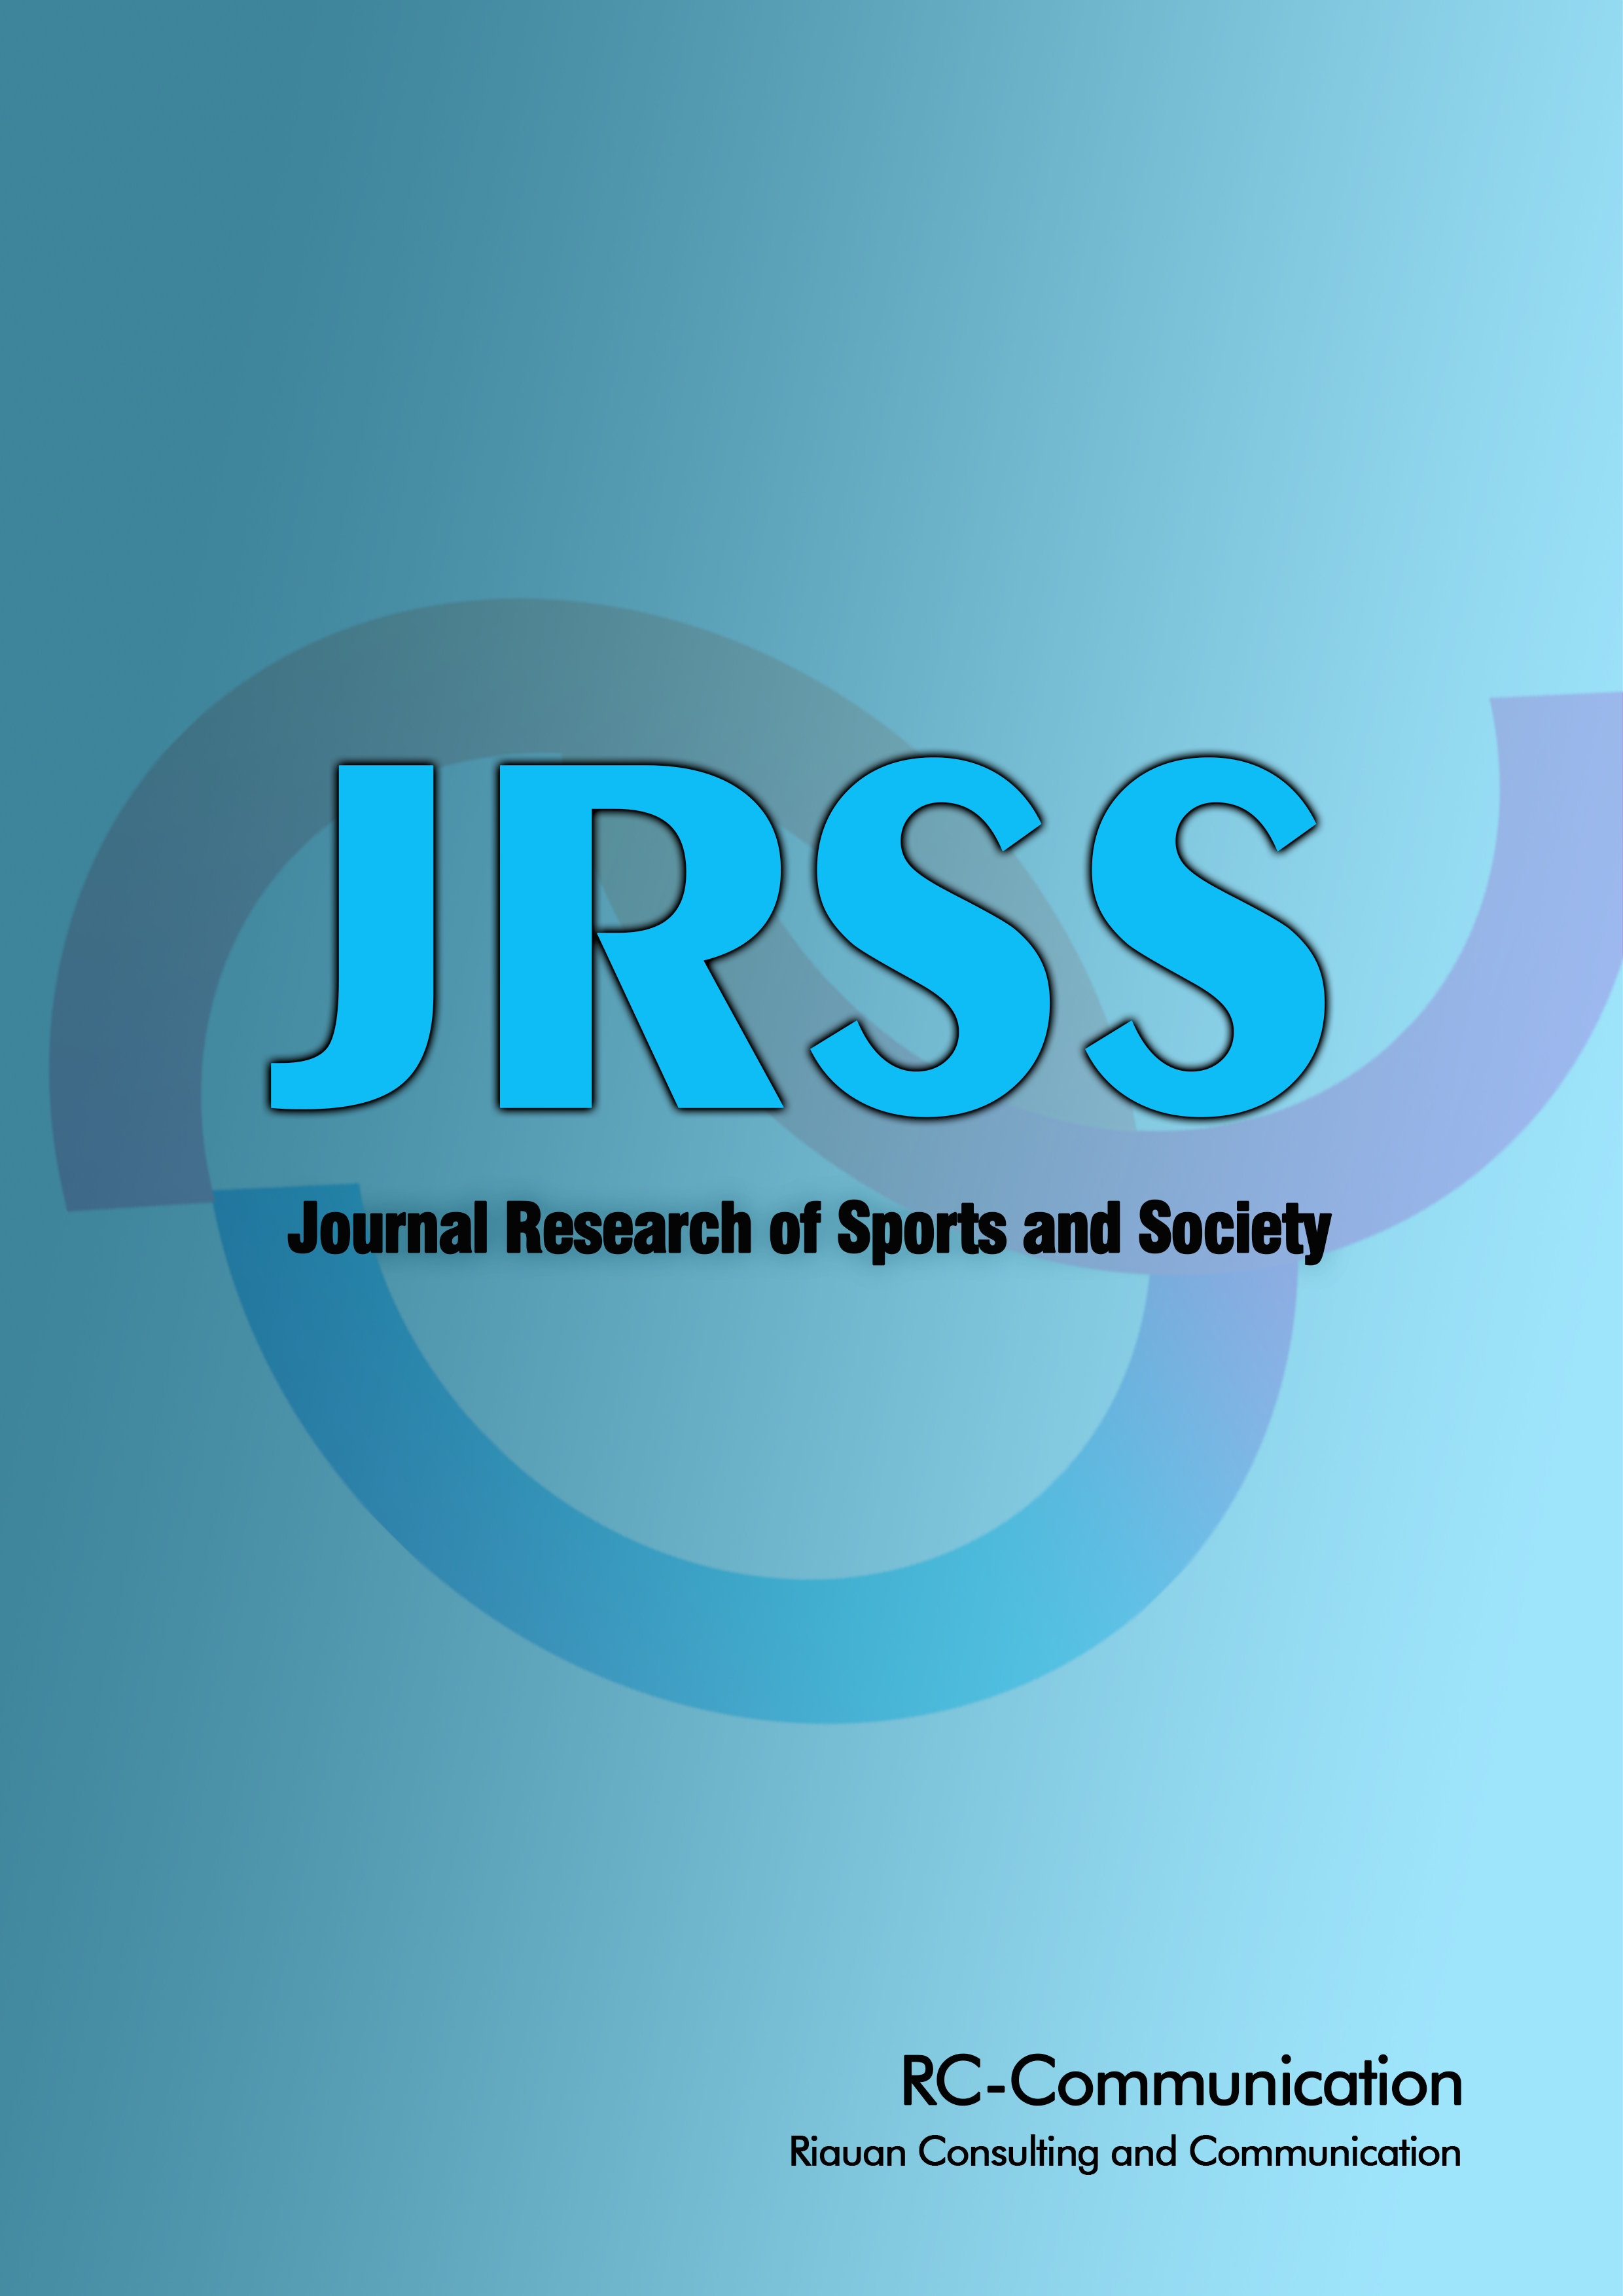 Journal Research of Sports and Society